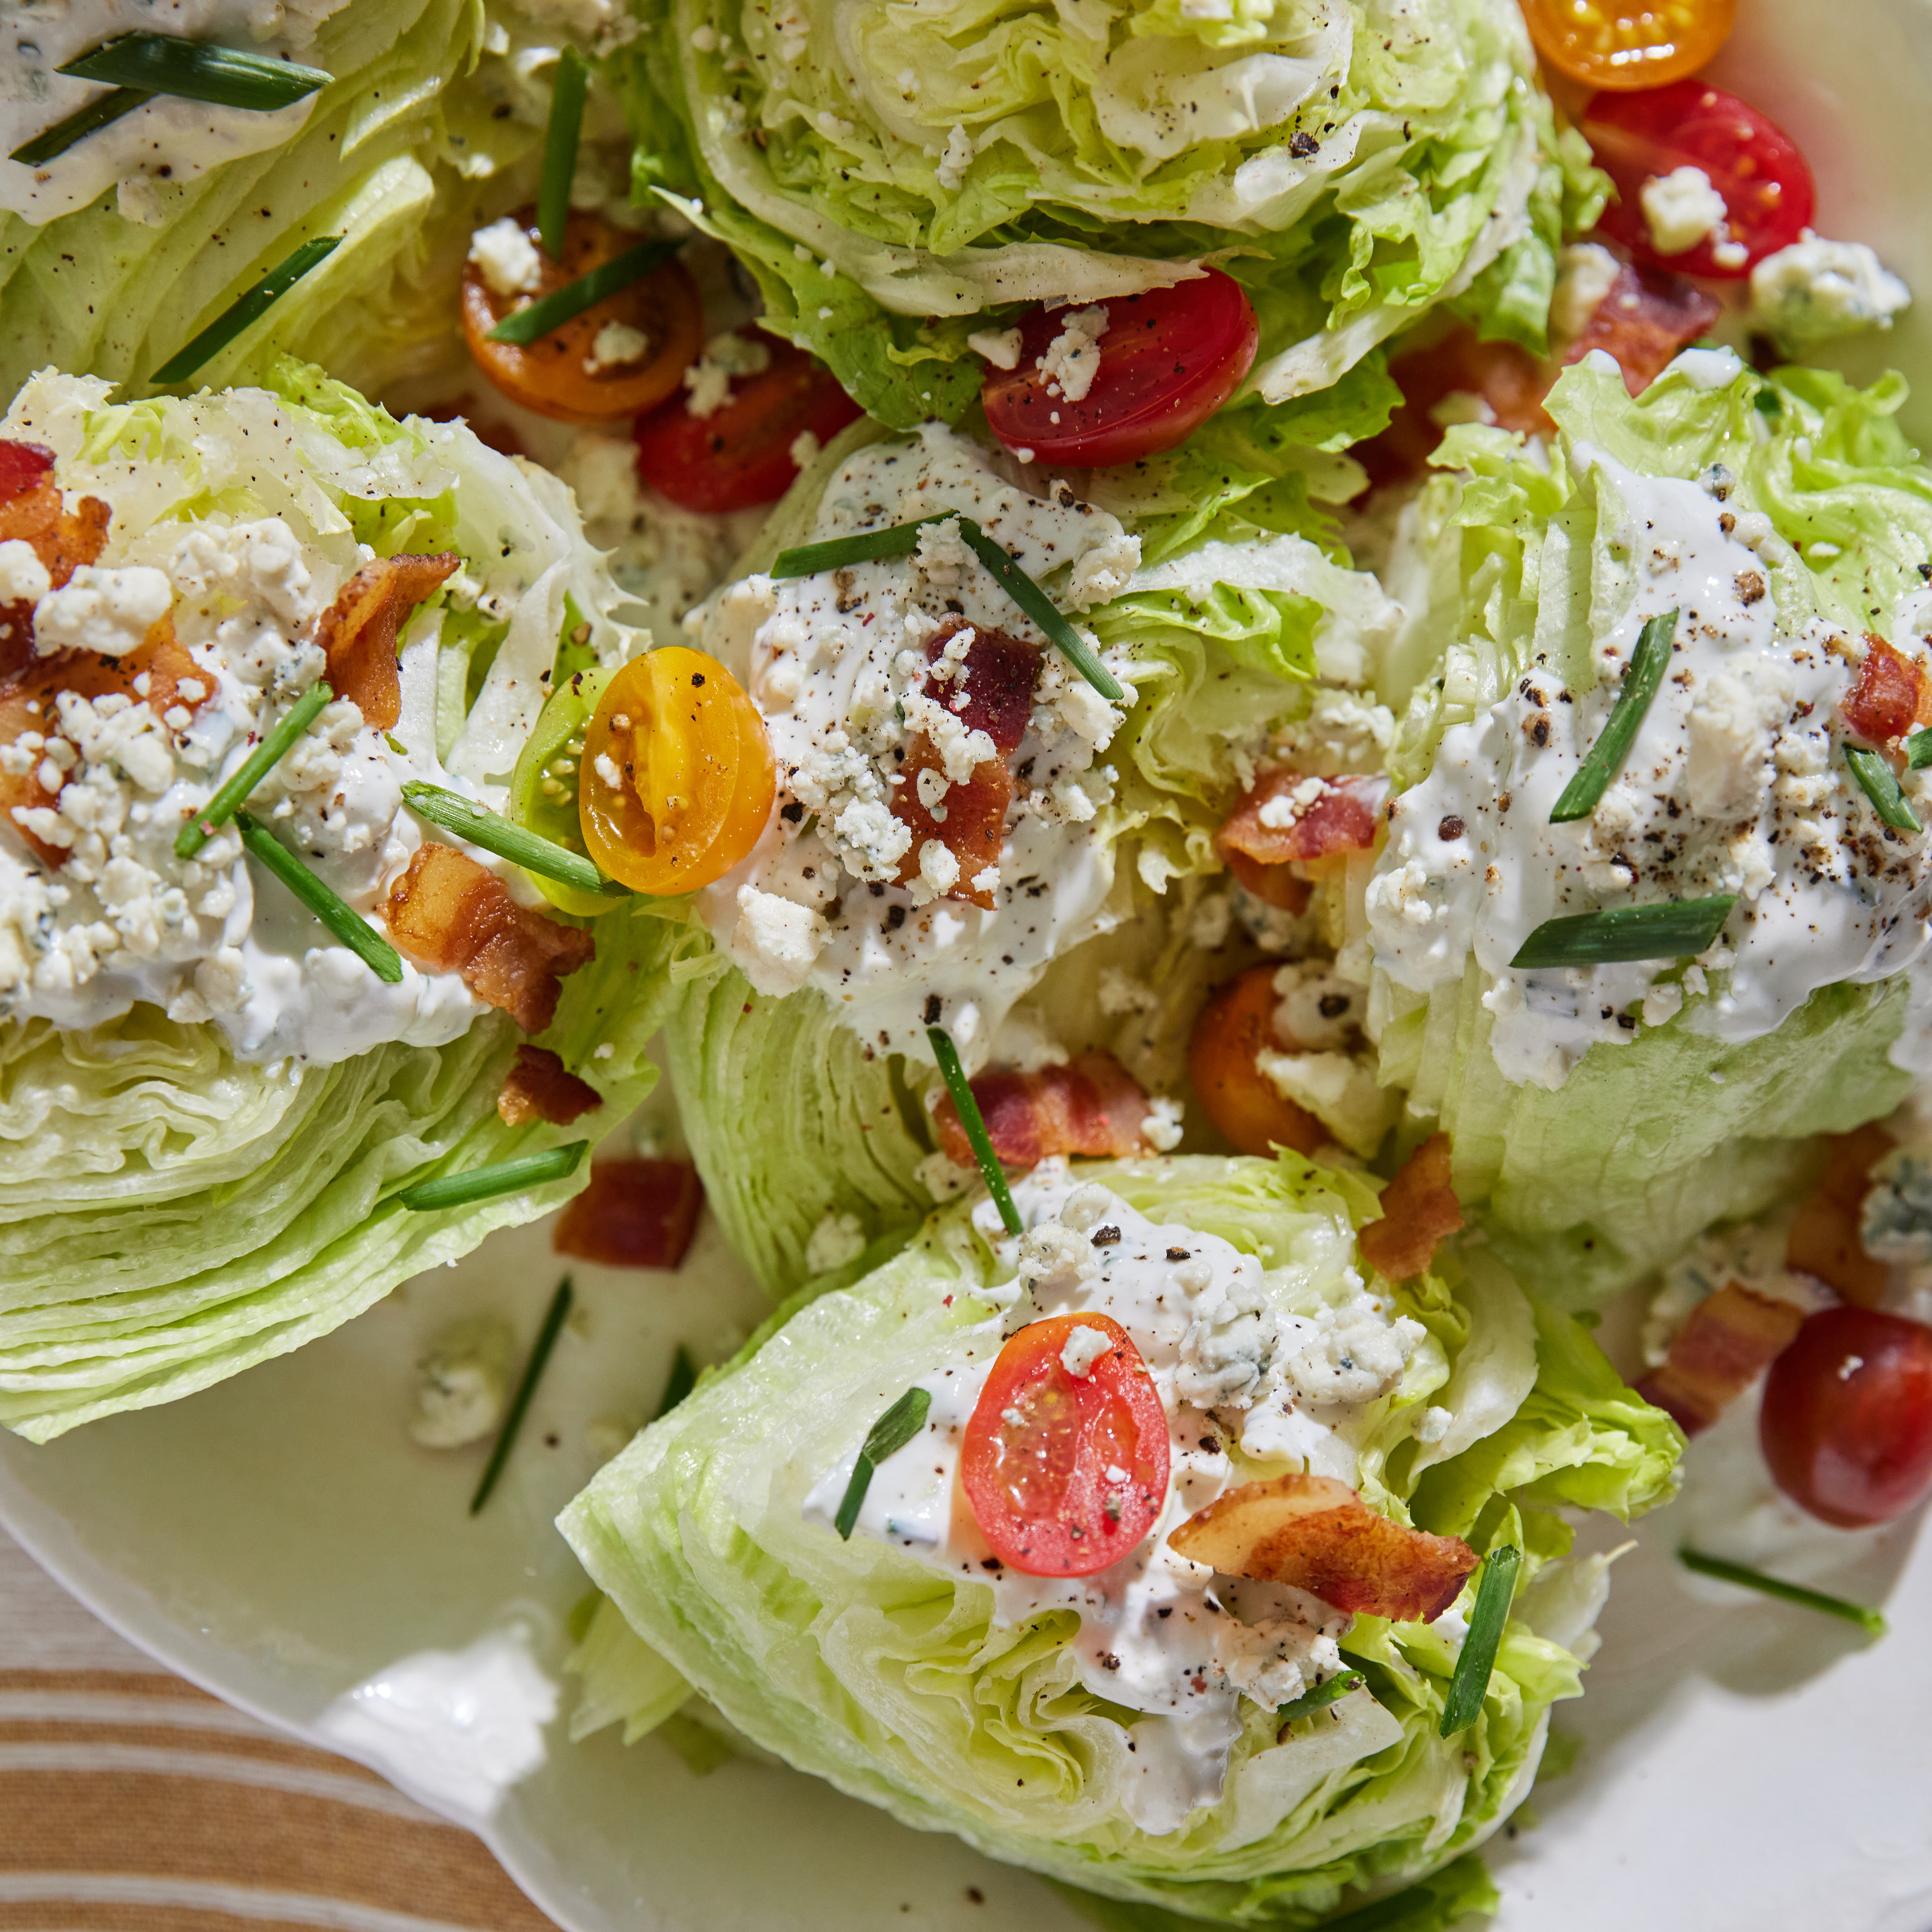 Joanna Gaines' Wedge Salad with Blue Cheese Dressing